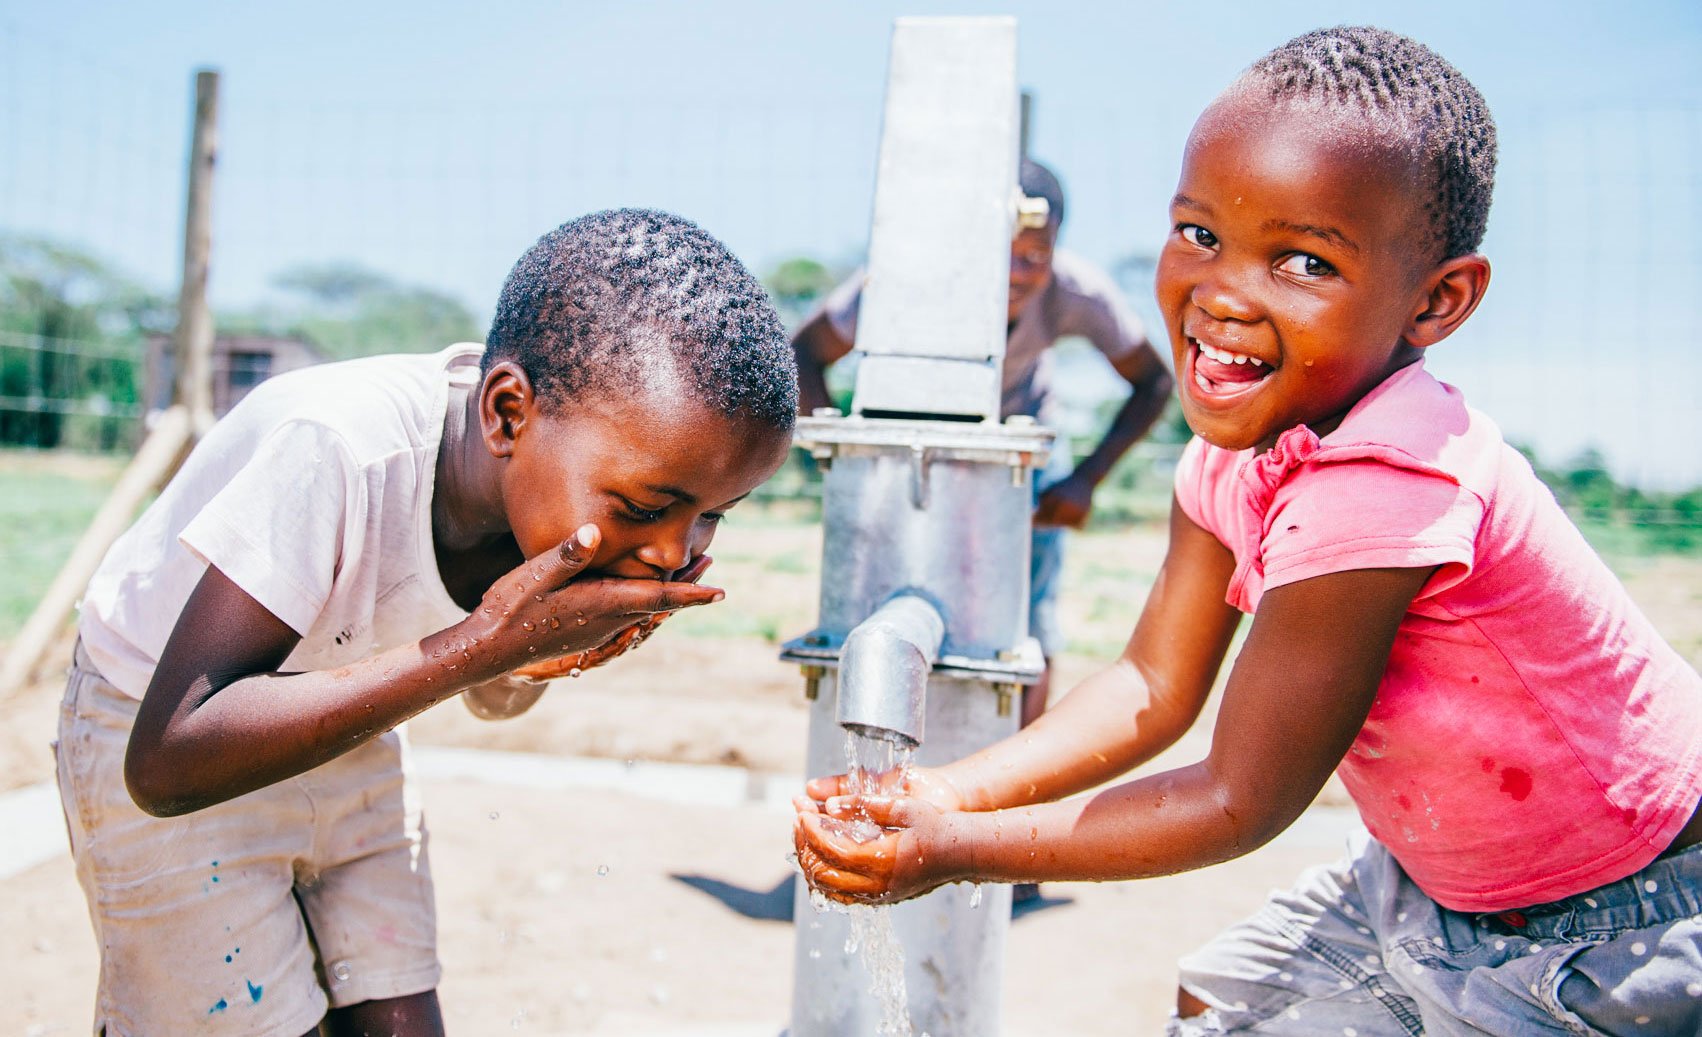 Thirst Project and ZOX teaming up to bring water to those in need.